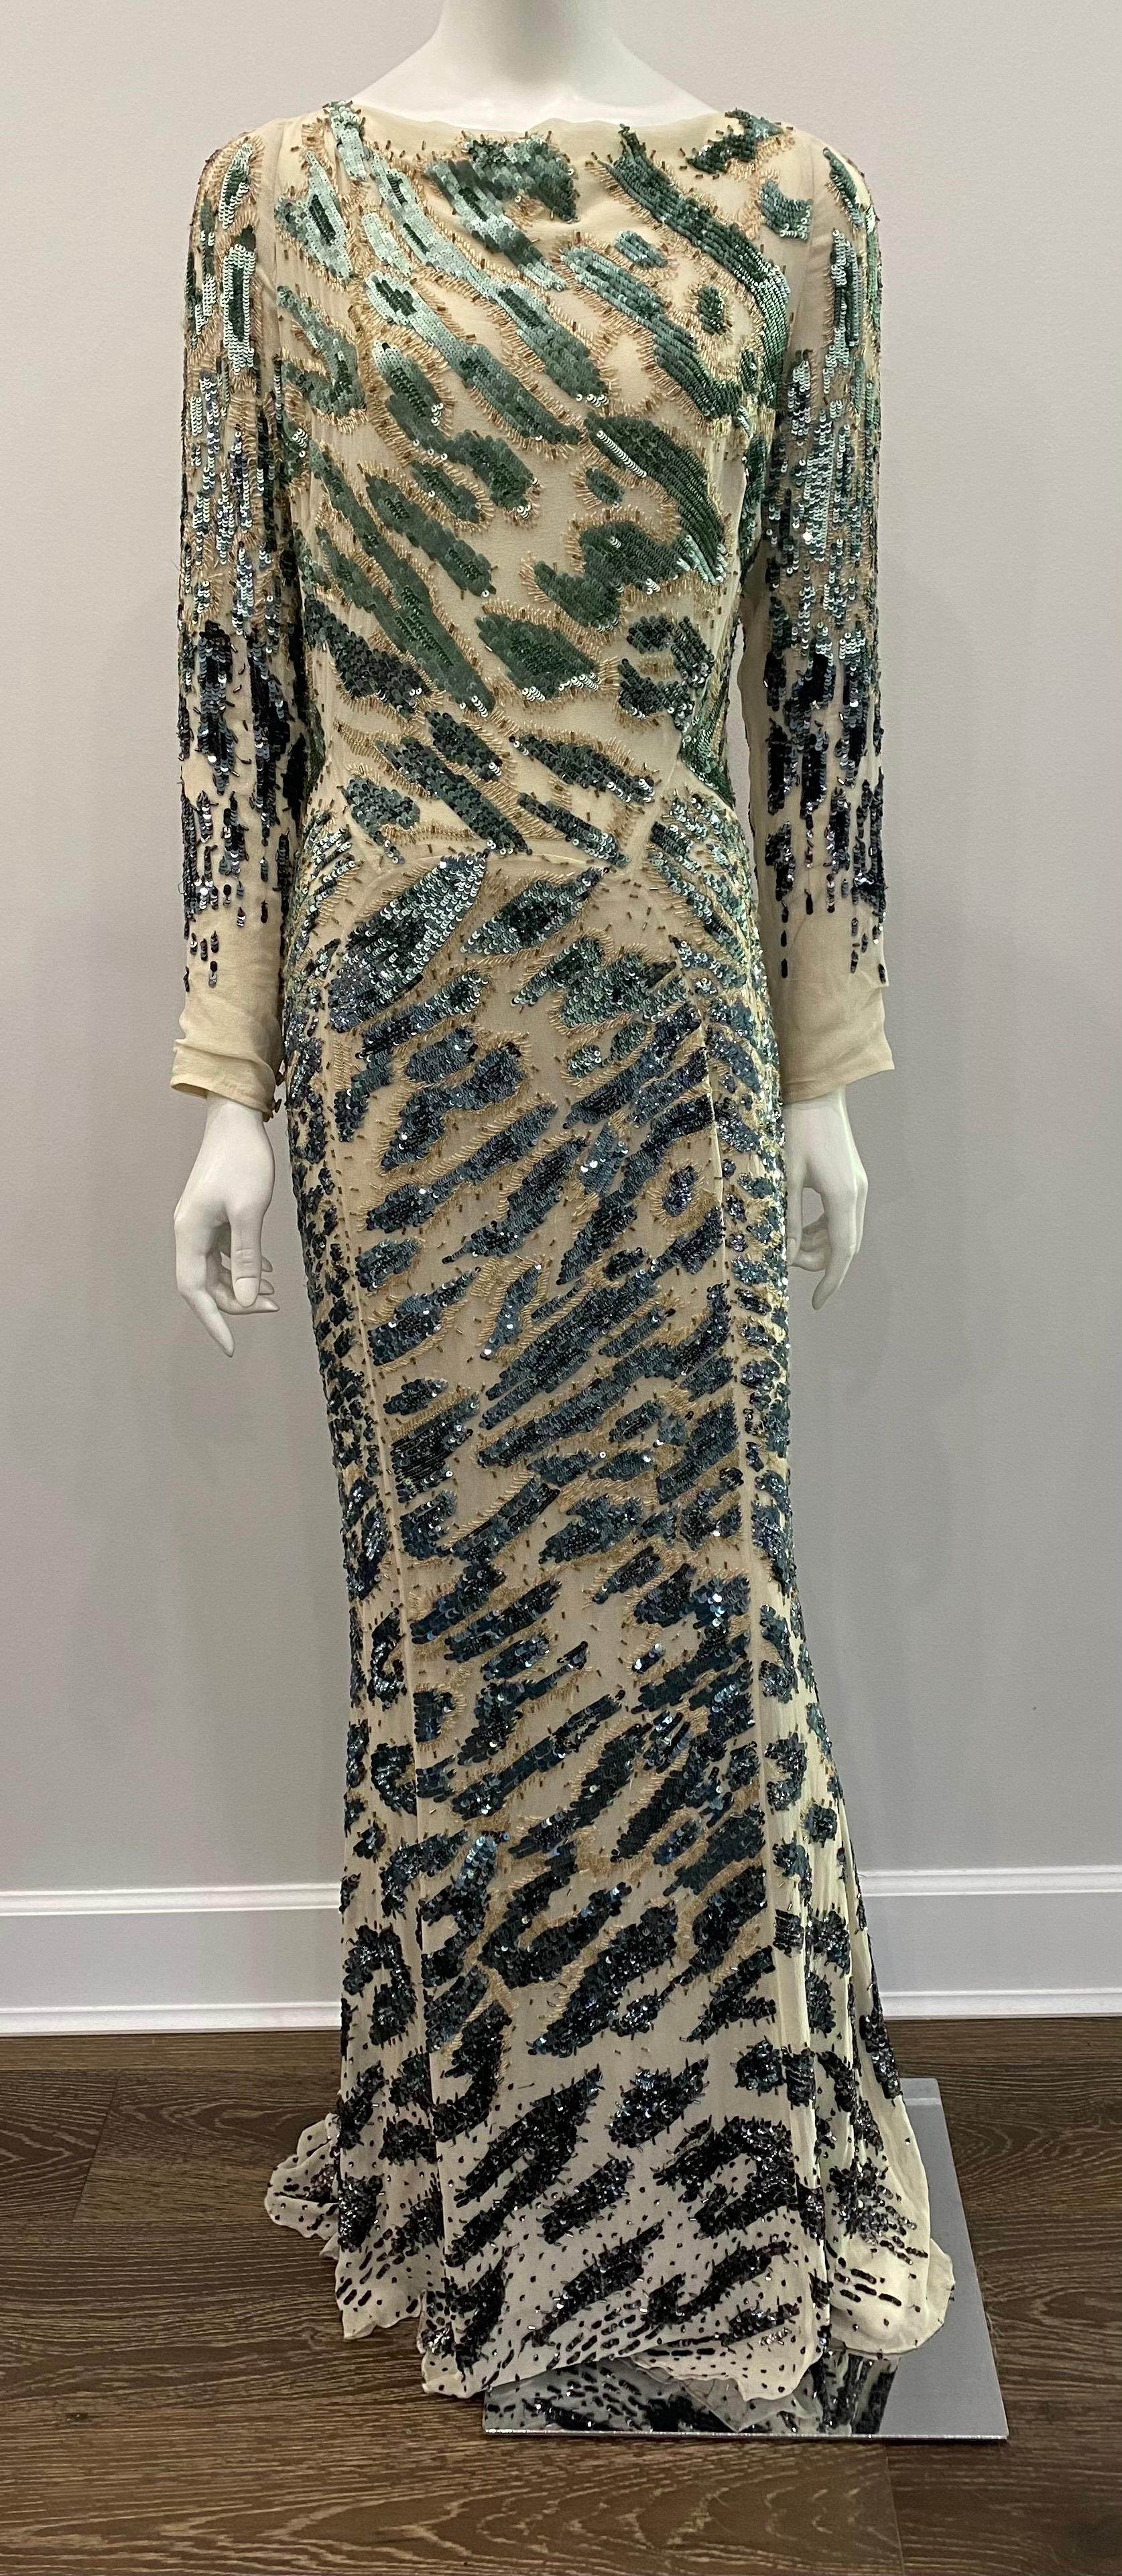 Roberto Cavalli Ivory Silk Chiffon gown with Green and Tan sequin/bugle beads - Sz 44 This gorgeous gown has long sleeves, an low plunging v neck open back with a ivory ribbon tie across the shoulders to help keep gown on the shoulders. The gown is